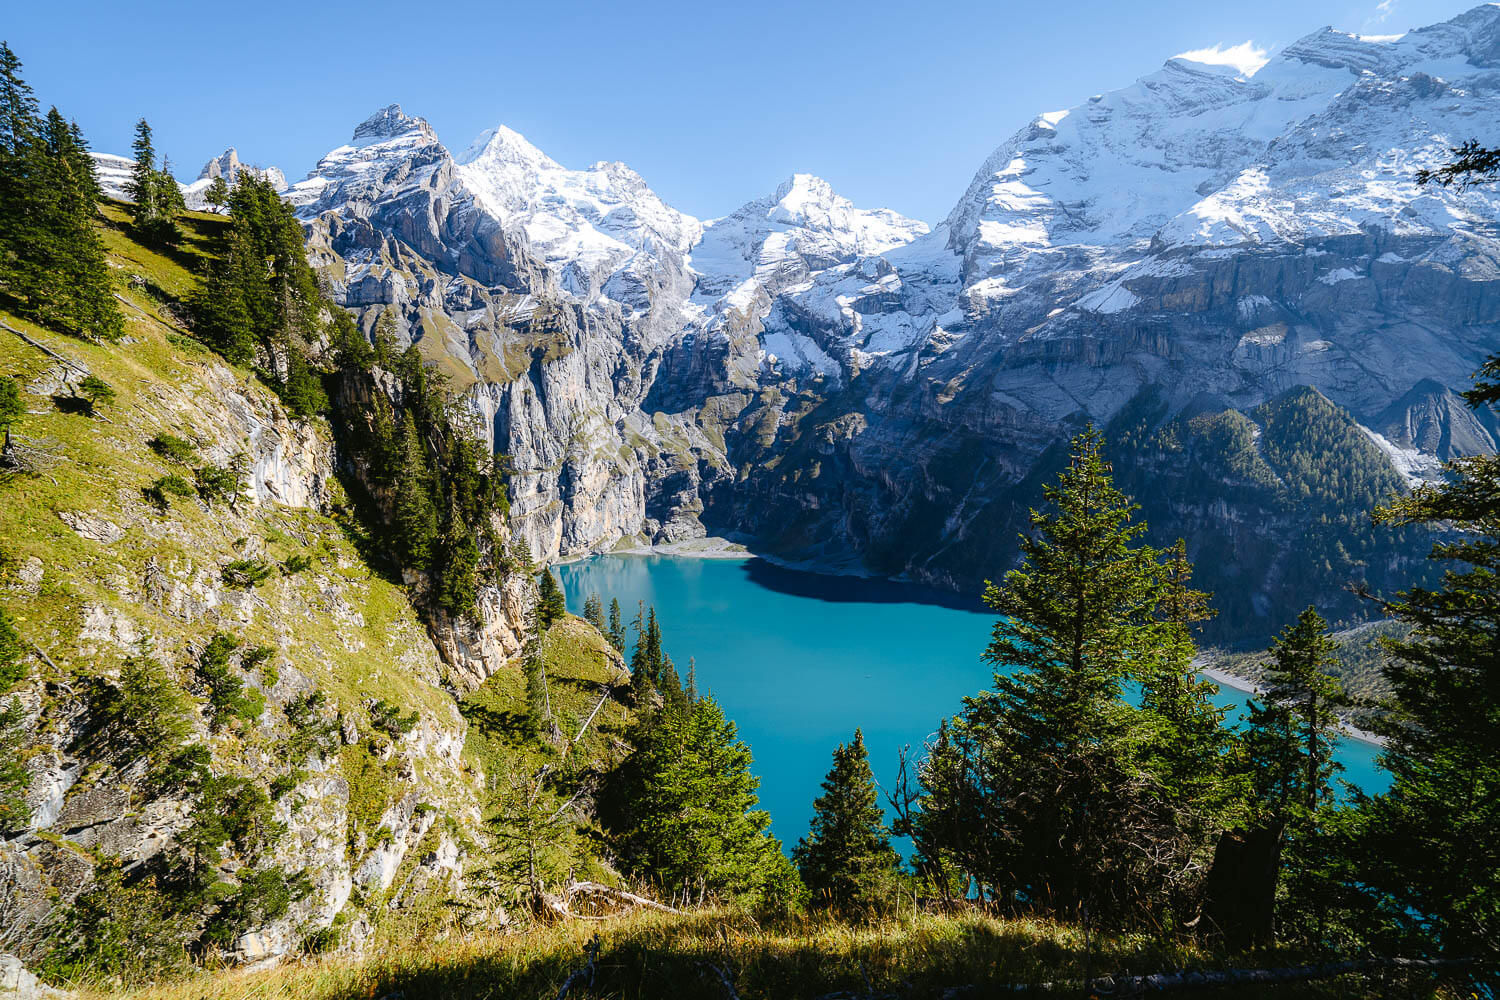 The first view of the Oeschinensee Lake